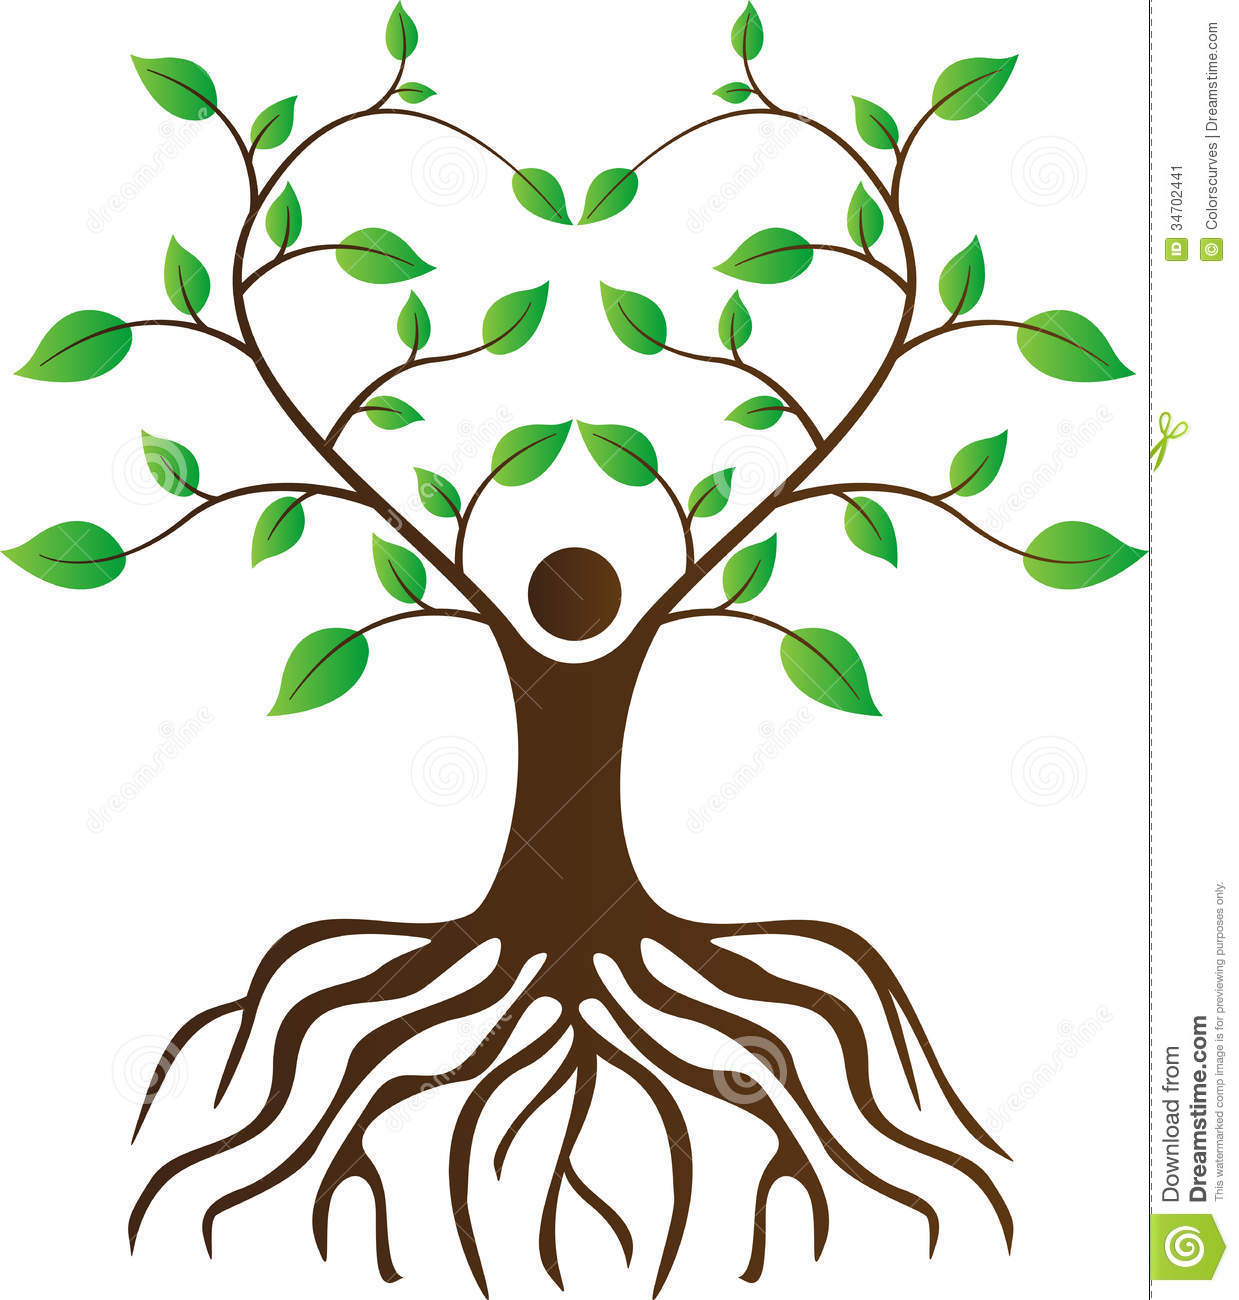 Clip Art Tree With Roots Clipart Panda Free Clipart Images